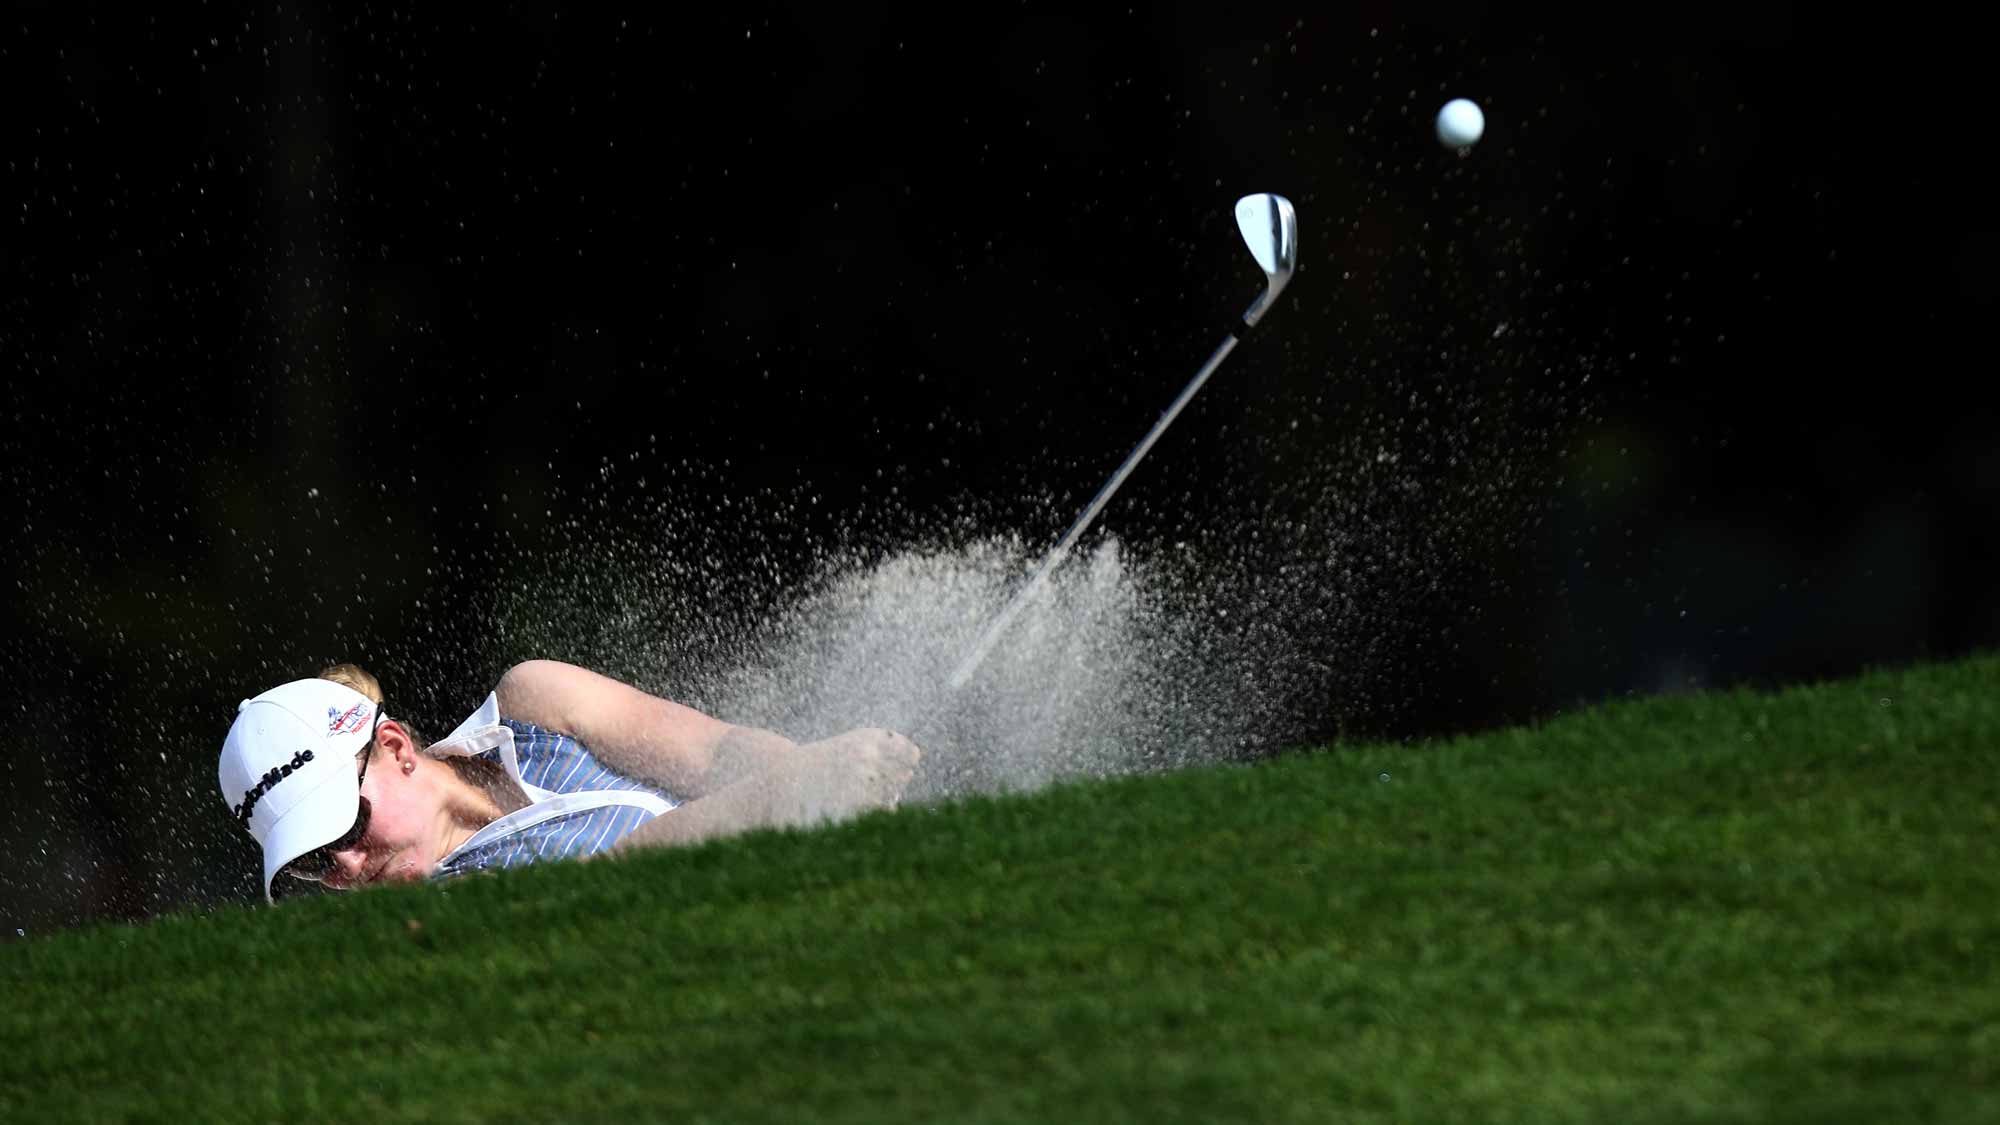 Austin Ernst of USA plays her bunker shot on the 6th hole during round one of the Sime Darby LPGA Tour at Kuala Lumpur Golf & Country Club